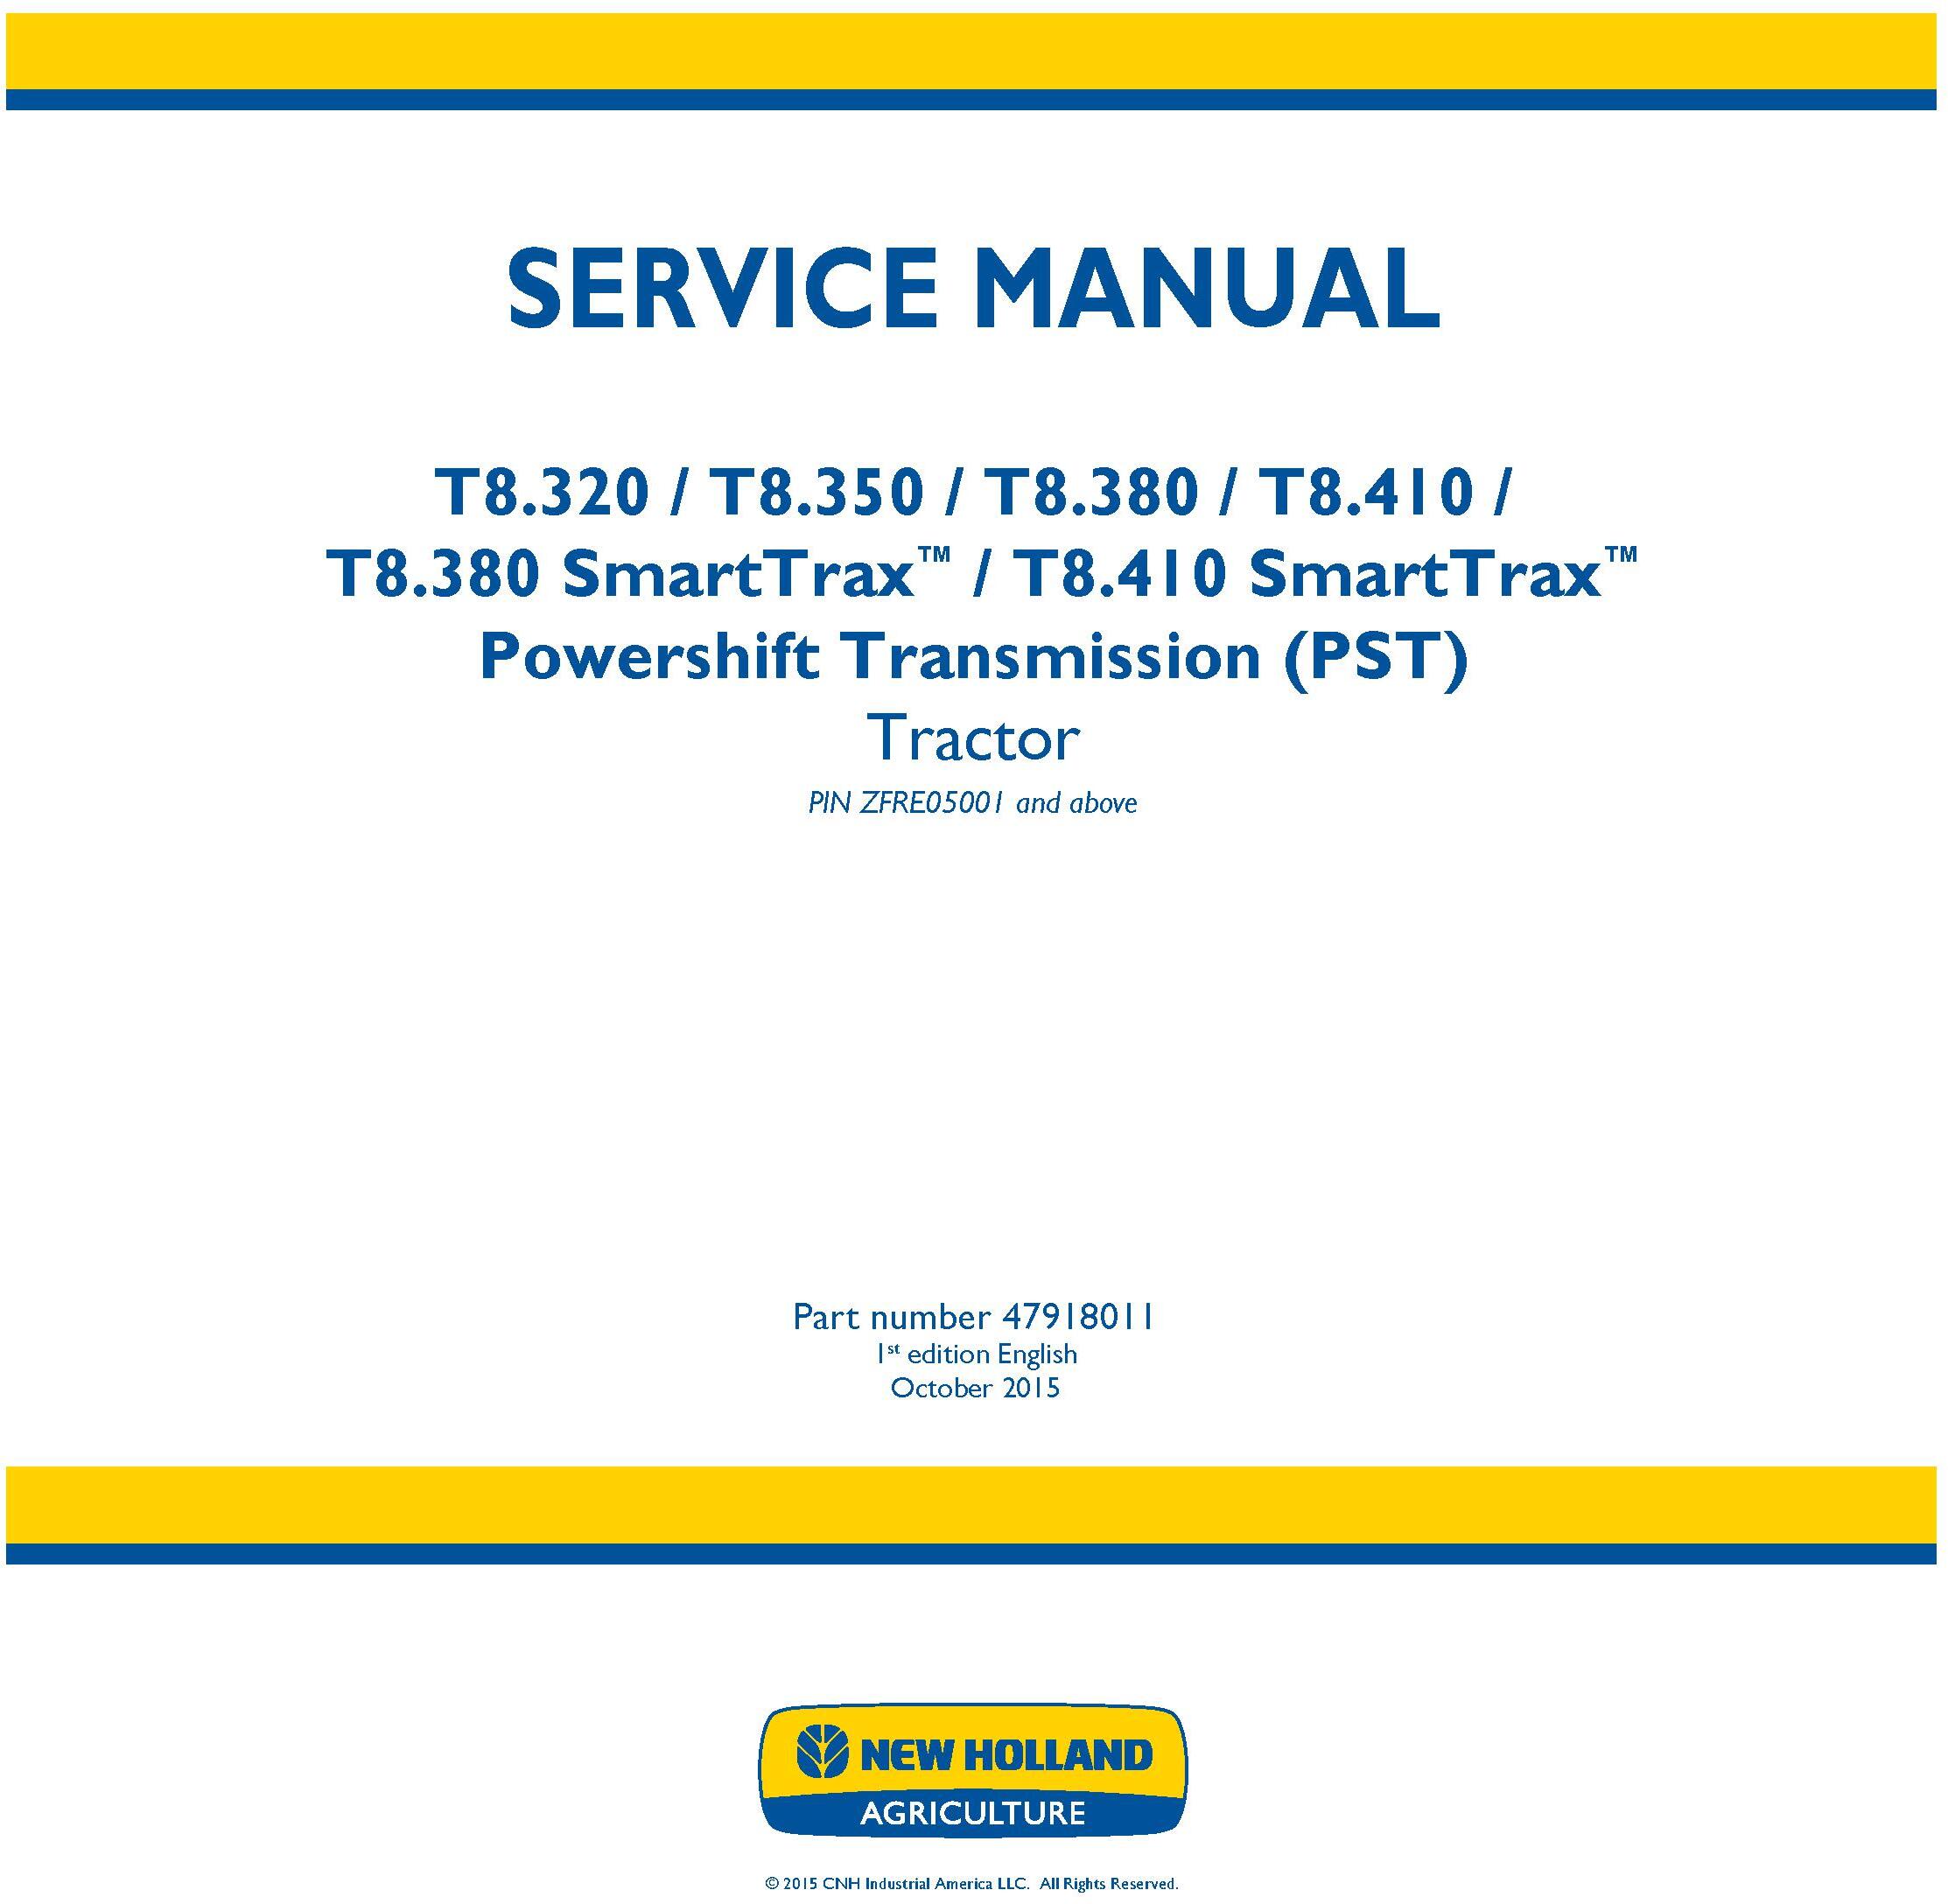 New Holland T8.320, T8.350, T8.380, T8.410 and SmartTrax Tier 2 Tractor with PST Service Manual - 19458